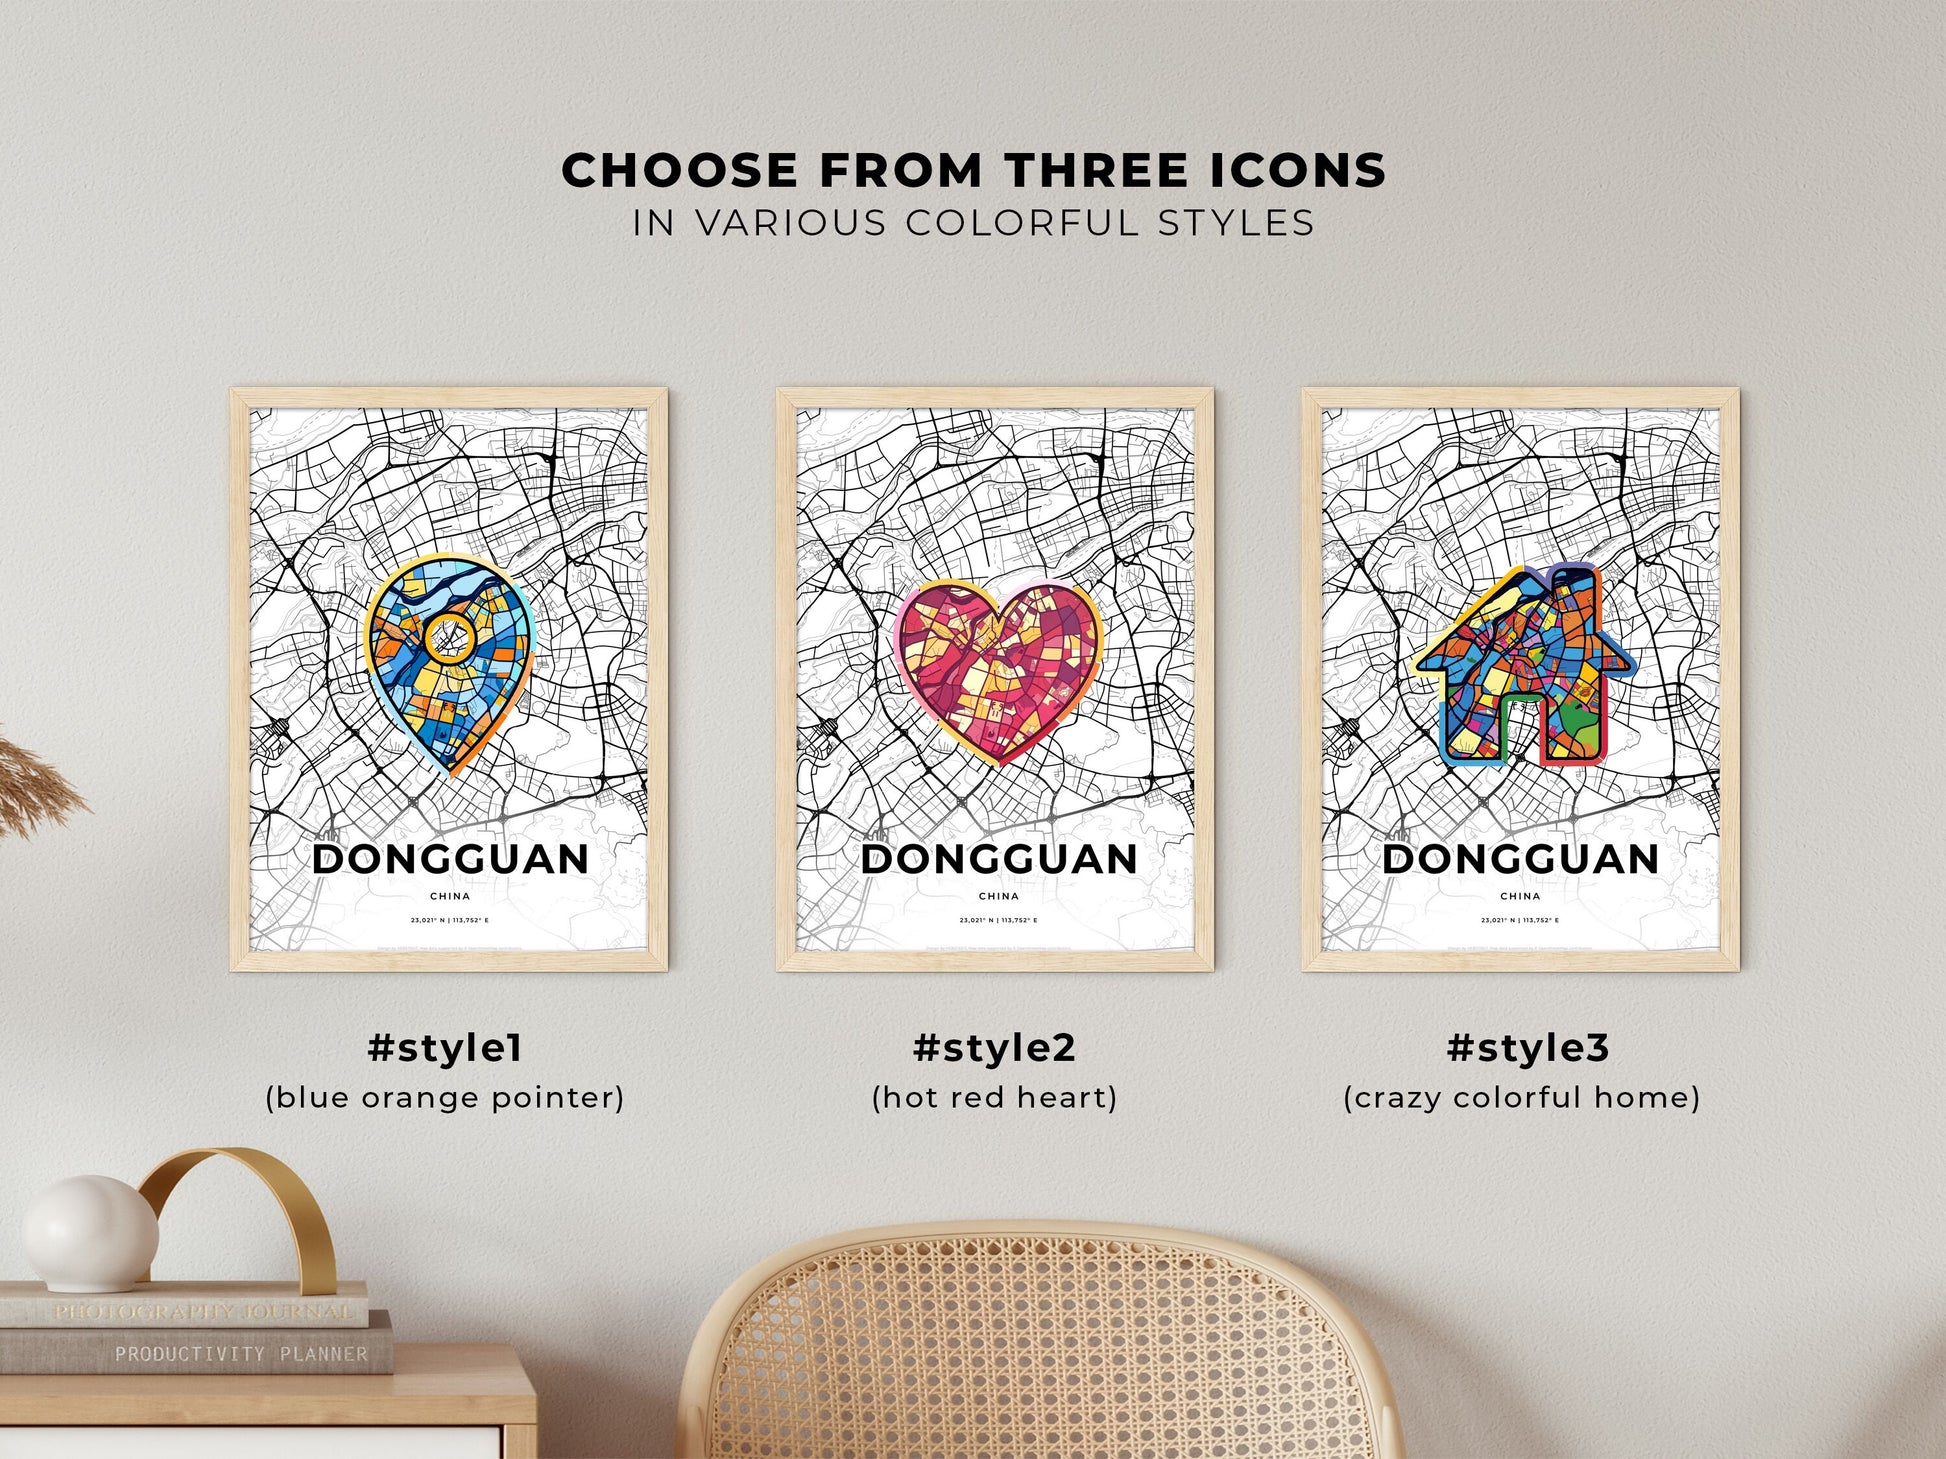 DONGGUAN CHINA minimal art map with a colorful icon. Where it all began, Couple map gift.